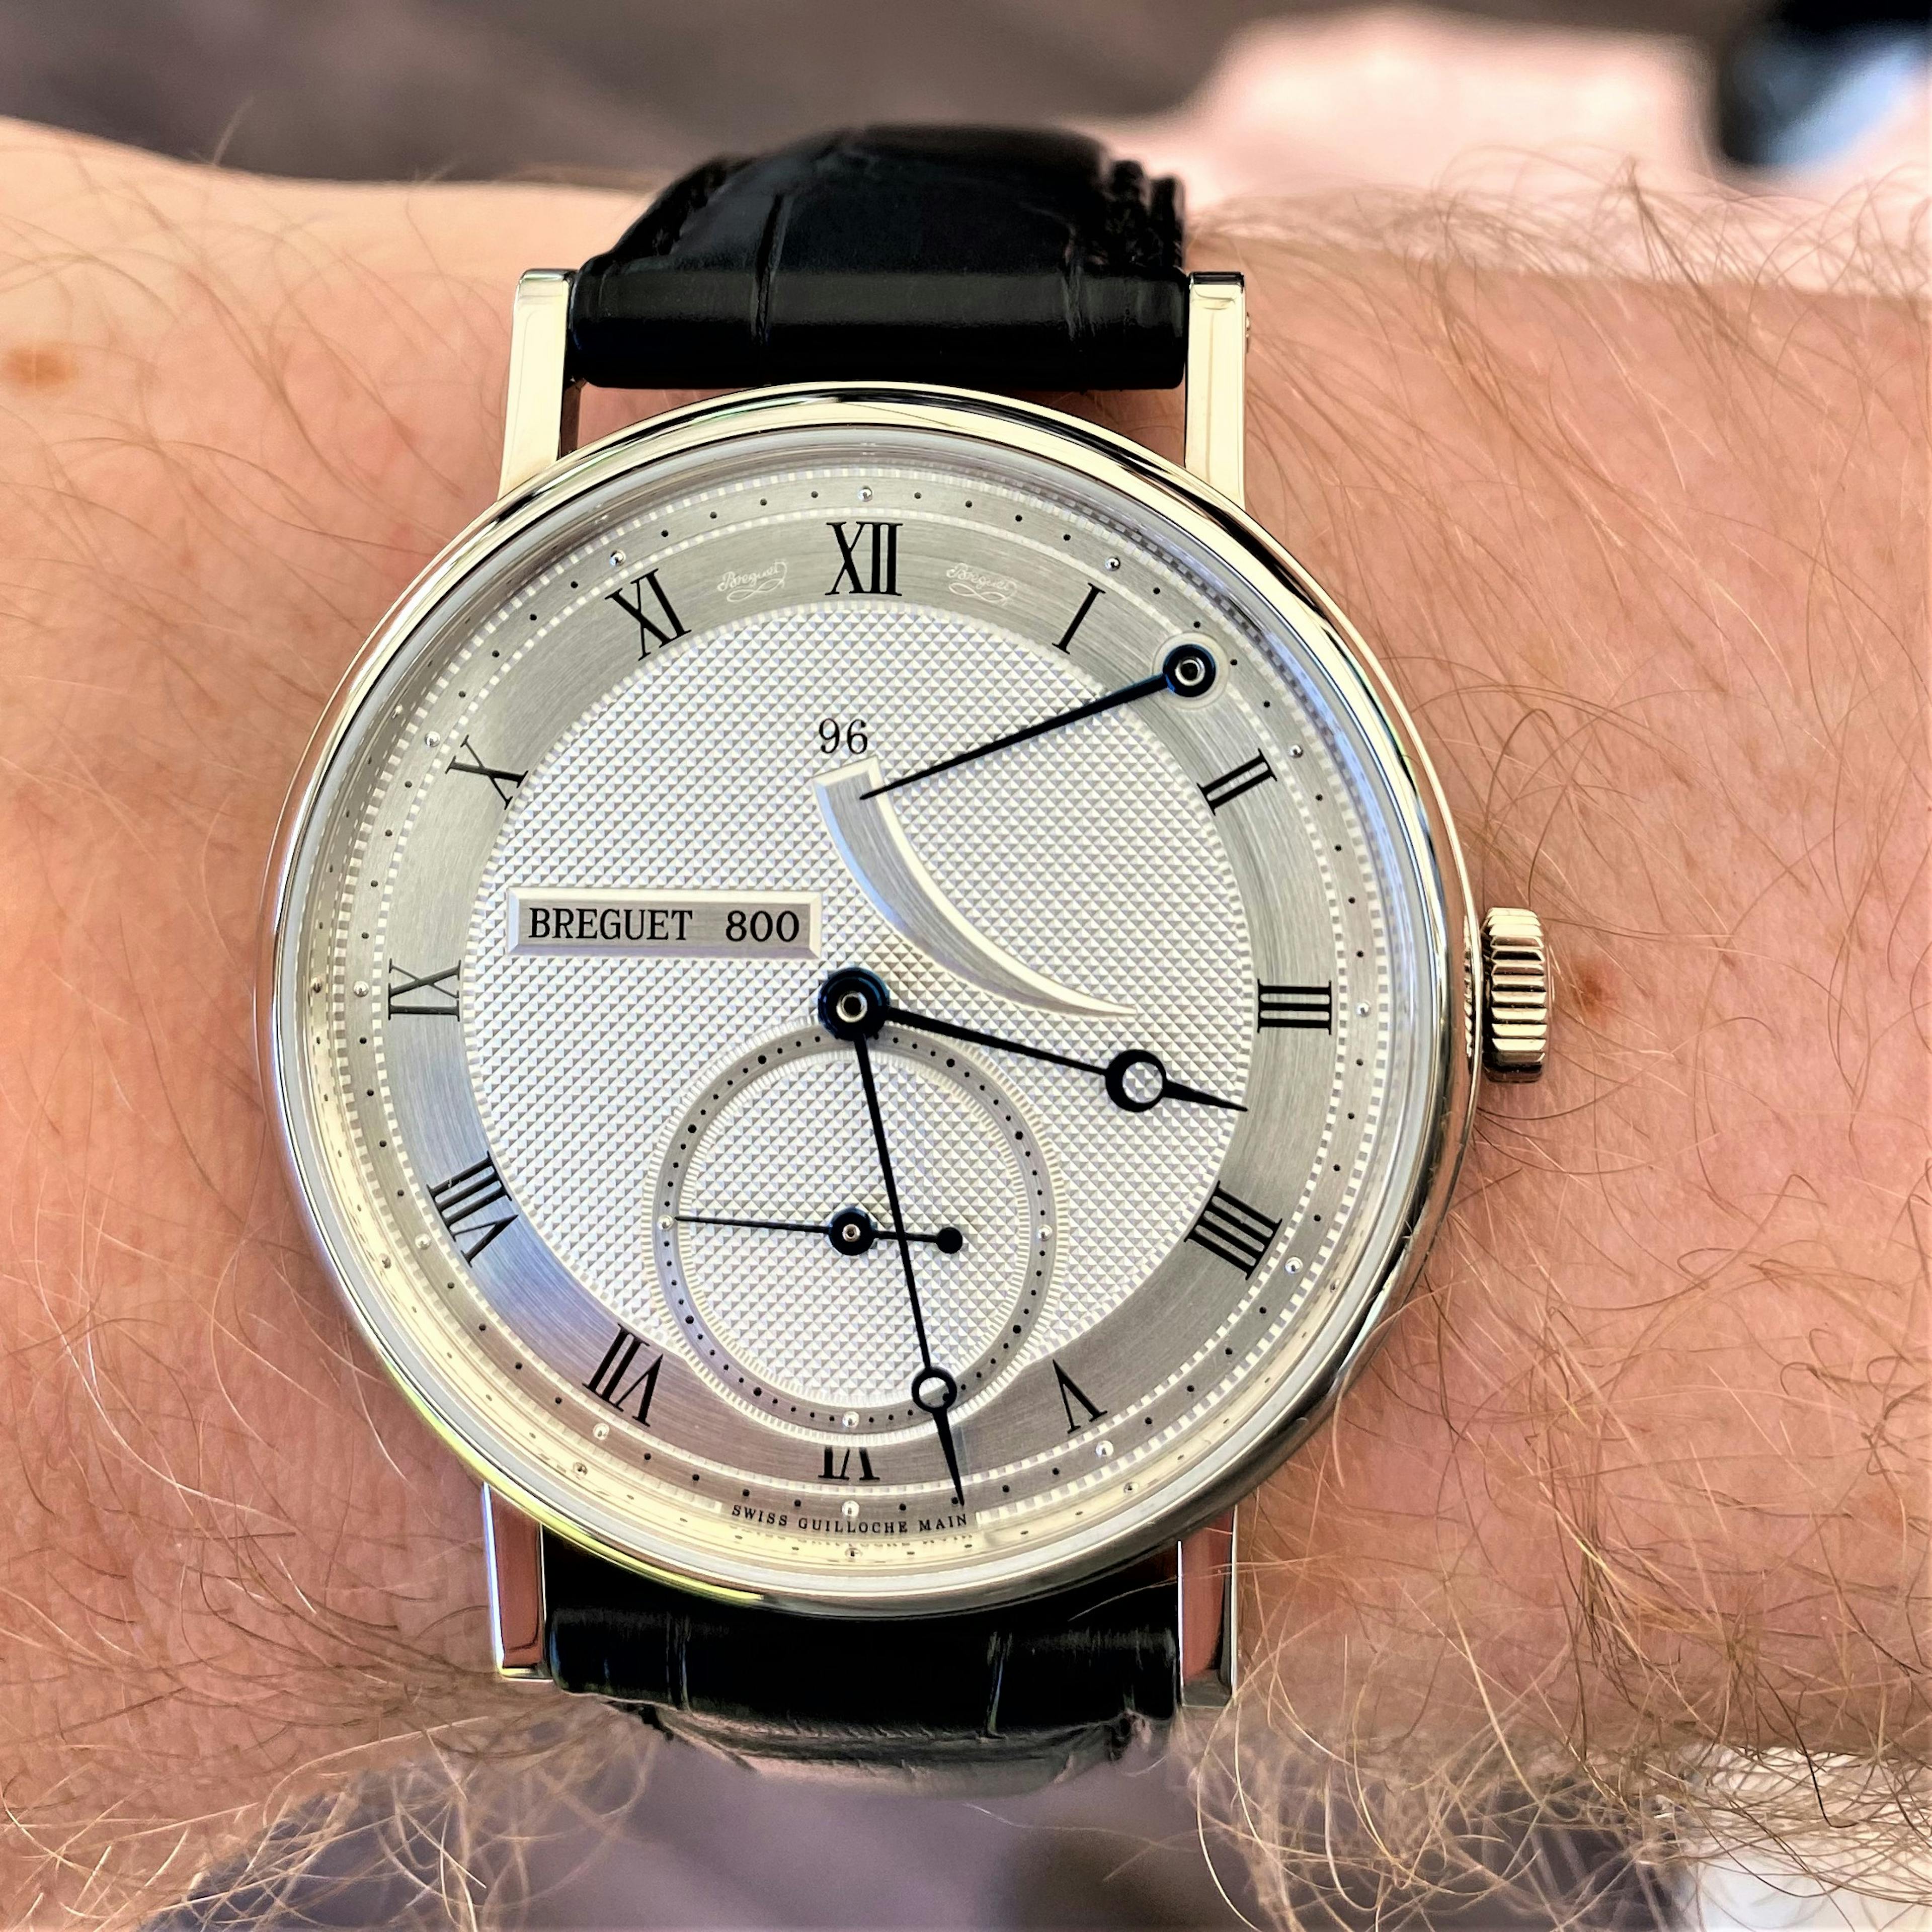 Modern Breguet Classique with Classic Breguet Minute and Hour hands with "Breguet Circle, and Power Reserve Function with sweep wedge to make it easy to read. Note also the Roman numerals on a separate finish of dial for easy reading.